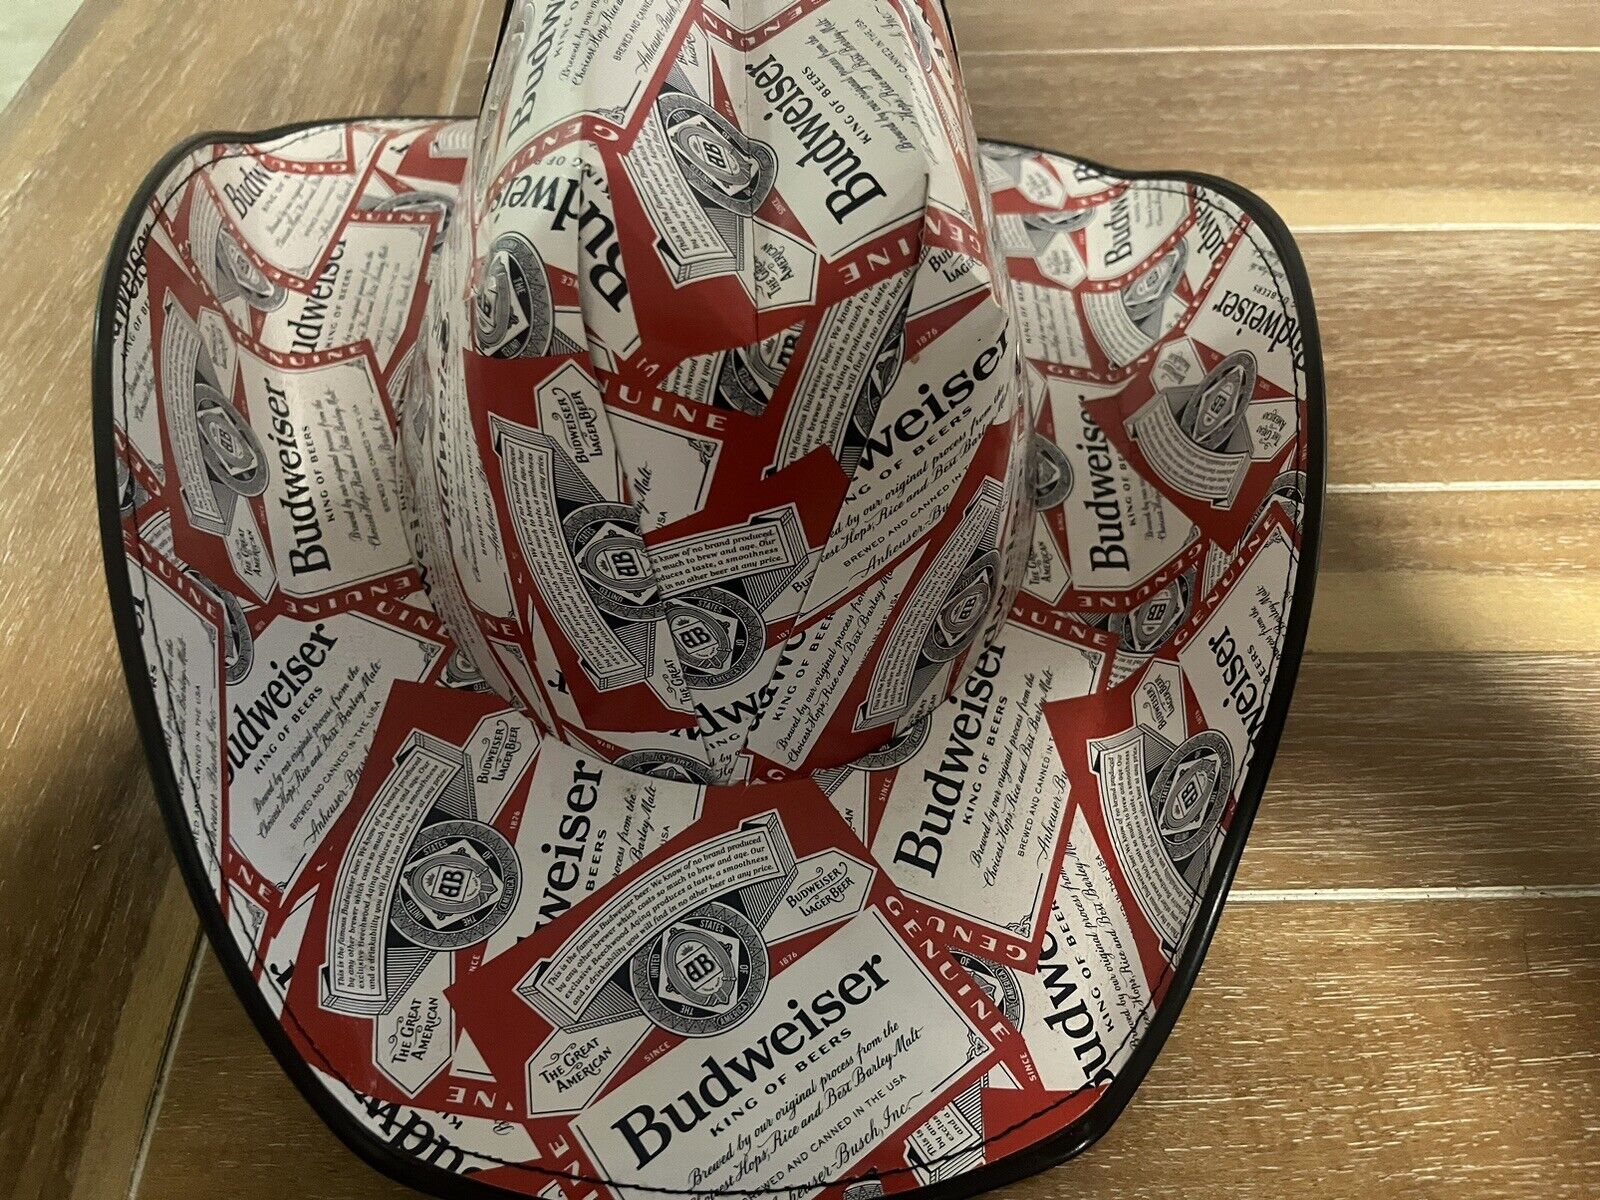 Budweiser  Novelty Cowboy Hat Cardboard Beer Box One Size Fits Most Adults